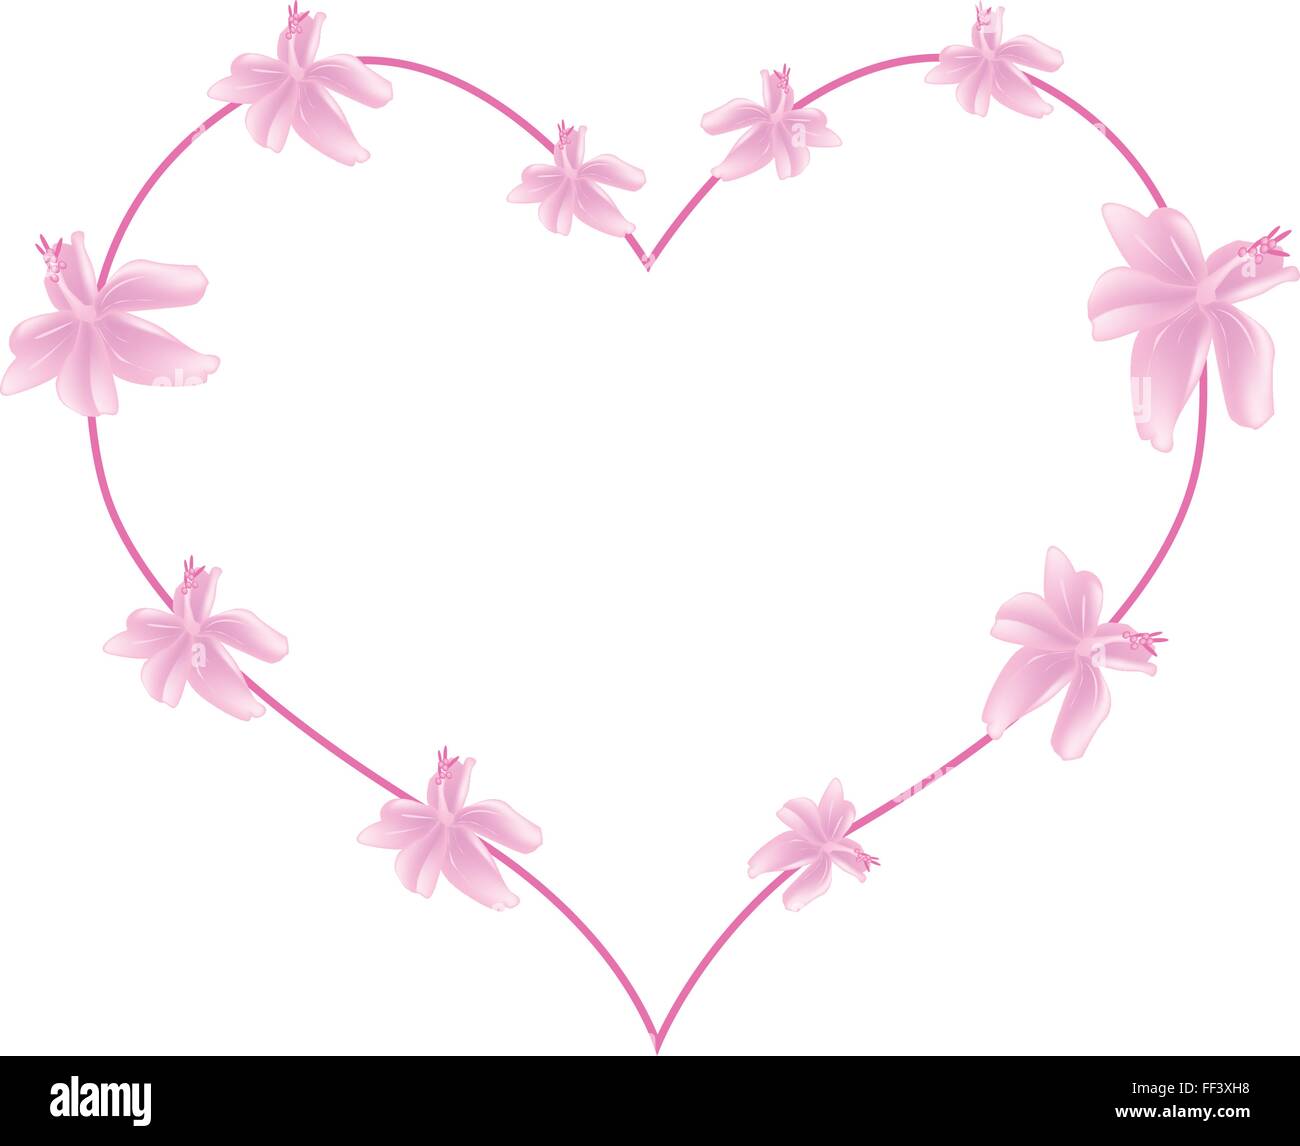 Love Concept, Illustration of Pink Urena Lobata Flowers Forming in Heart Shape Isolated on White Background. Stock Vector